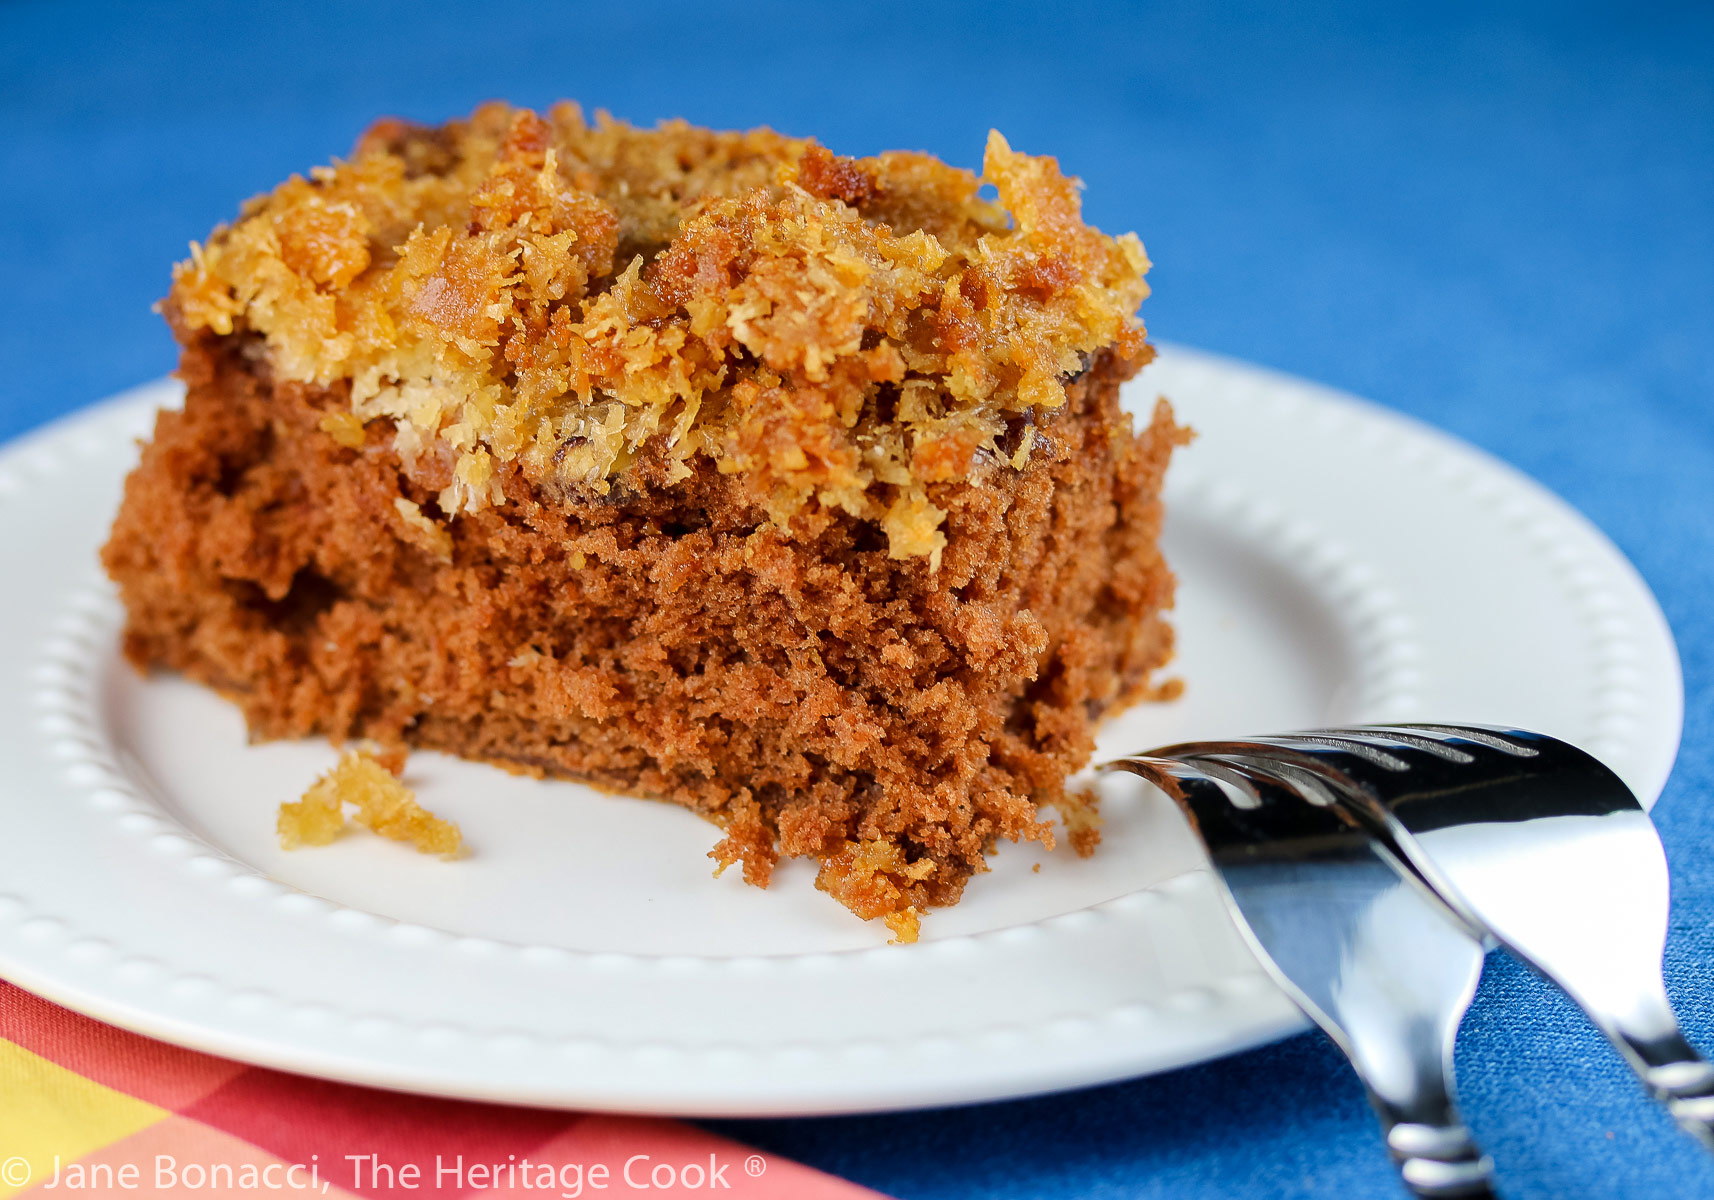 Square piece of cake with coconut/pecan frosting on a white plate; Cockeyed German Chocolate Cake © 2023 Jane Bonacci, The Heritage Cook.